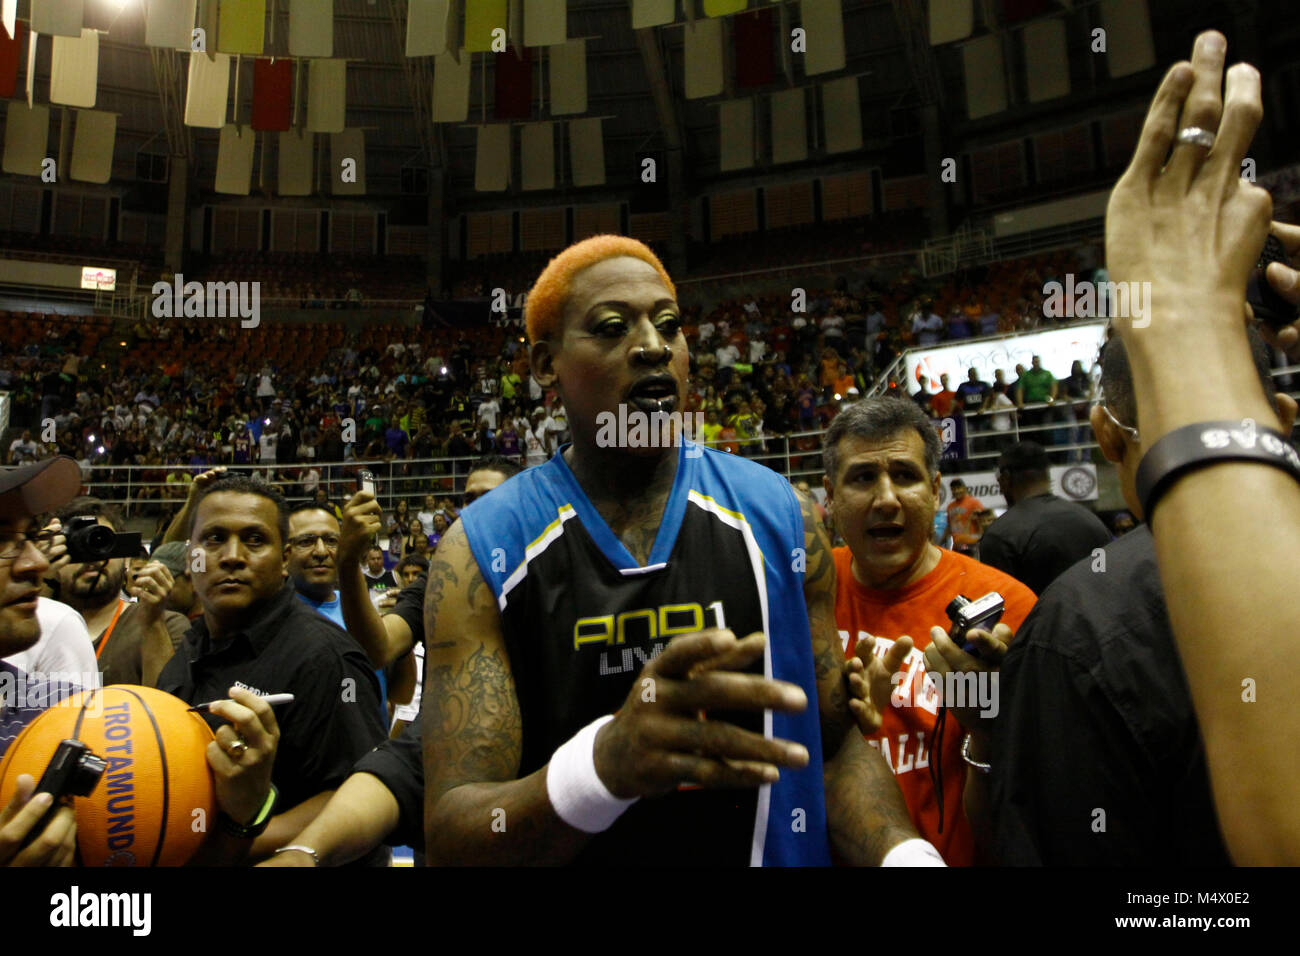 Valencia, Carabobo, Venezuela. 3rd Aug, 2012. August 03, 2014. ÃŠ Dennis Keith Rodman (born May 13, 1961 in Trenton, New Jersey, United States) is a former professional basketball player in the NBA, best known for his defensive and rebounding skills. For seven straight seasons he led the NBA in rebounding per game, which became a league record, and he was placed on the NBA defensive team of the year also in seven seasons. His fame grew even more due to his irreverent and controversial attitude on and off the courts. He has appeared in several television programs and movies.The photo was ma Stock Photo